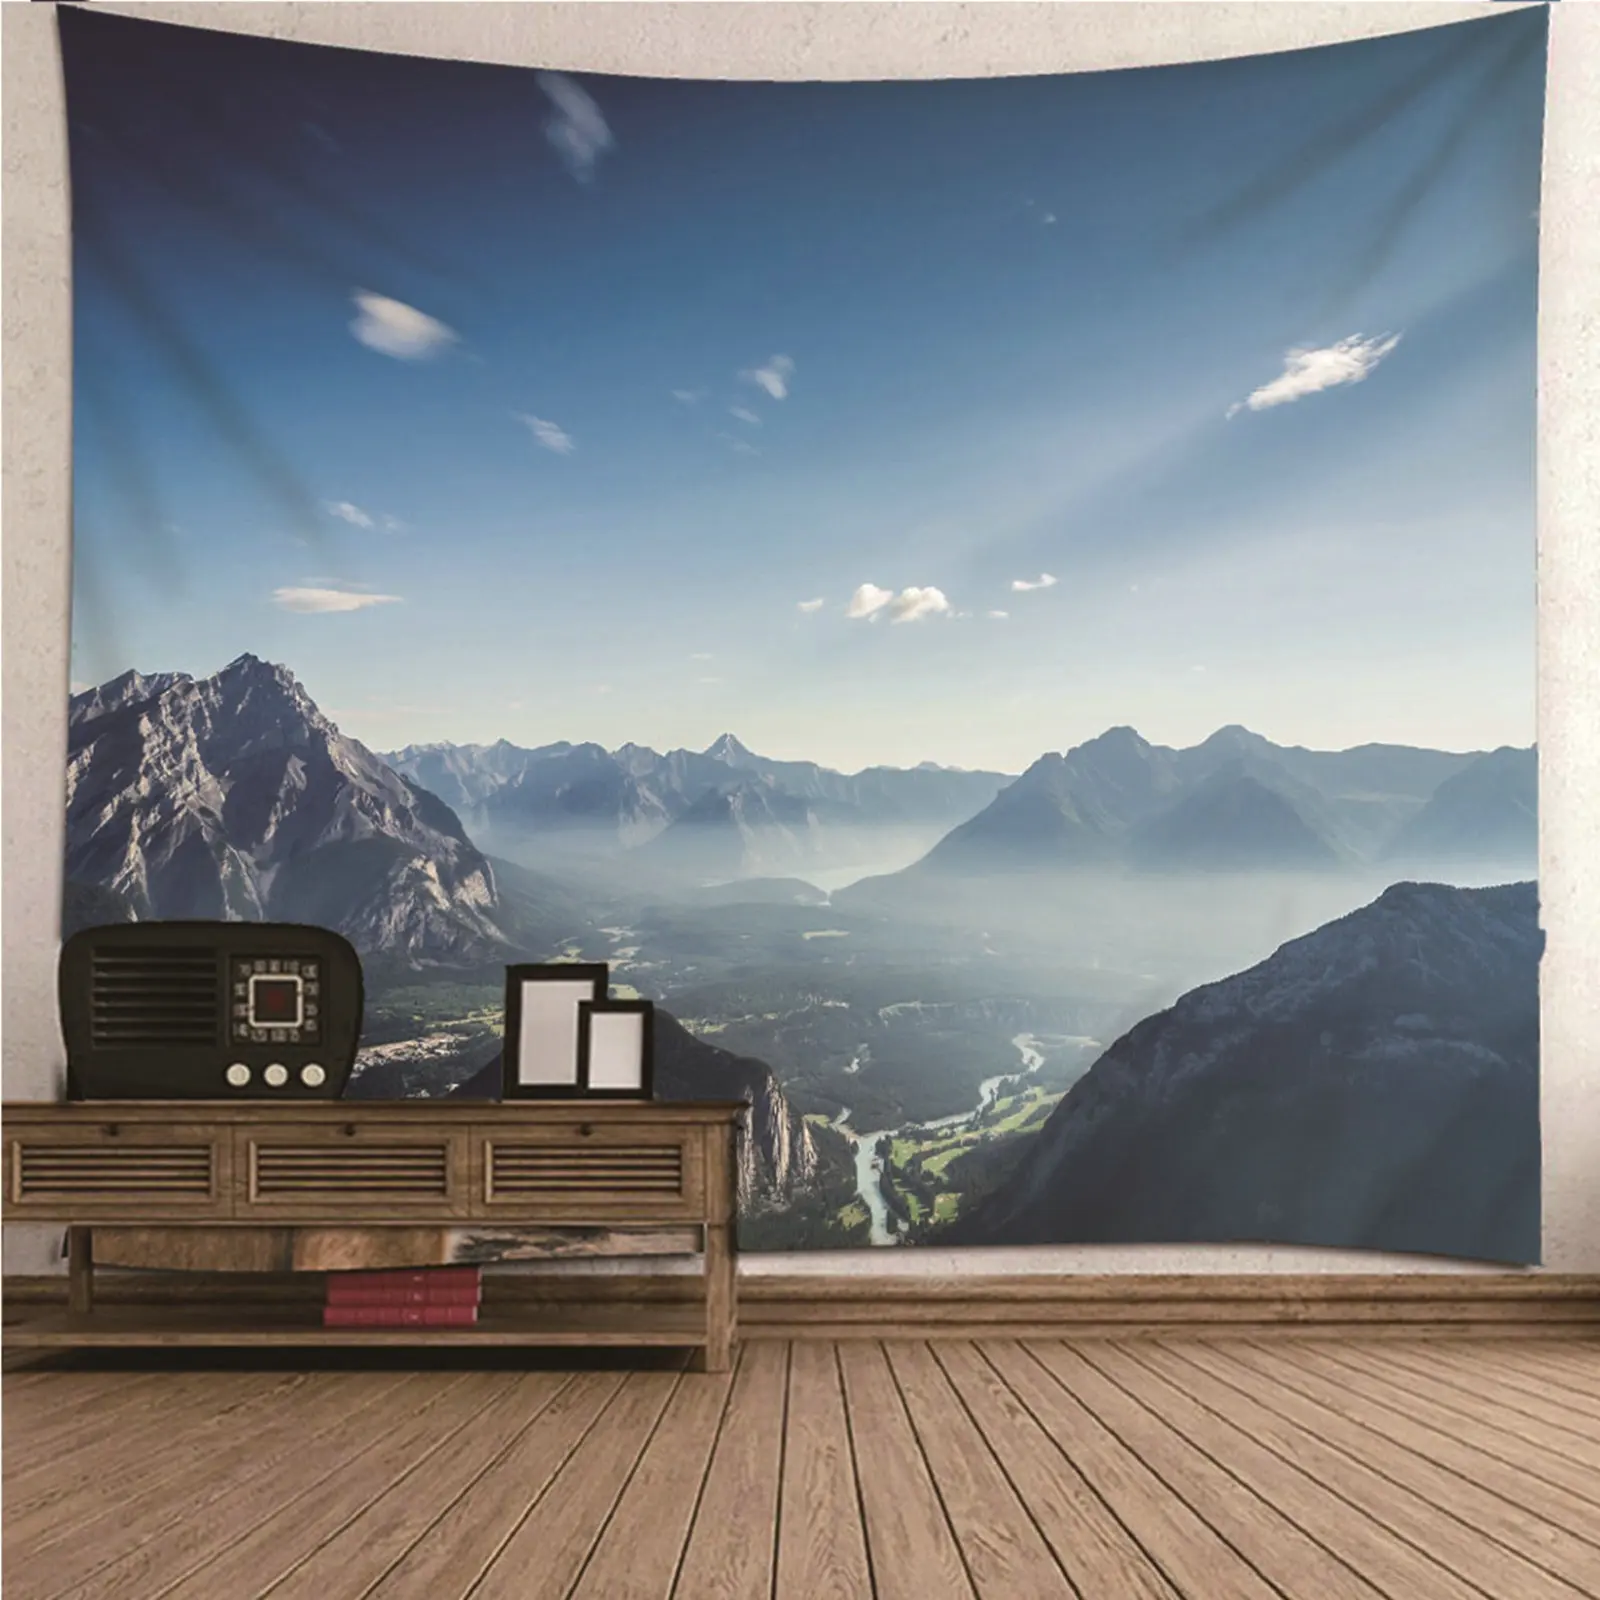 

Tapestry Bedroom Decorative Tapestry natural scenery Mountains, Rivers & Sky Wall Hanging Blanket Dorm Art Decor Covering